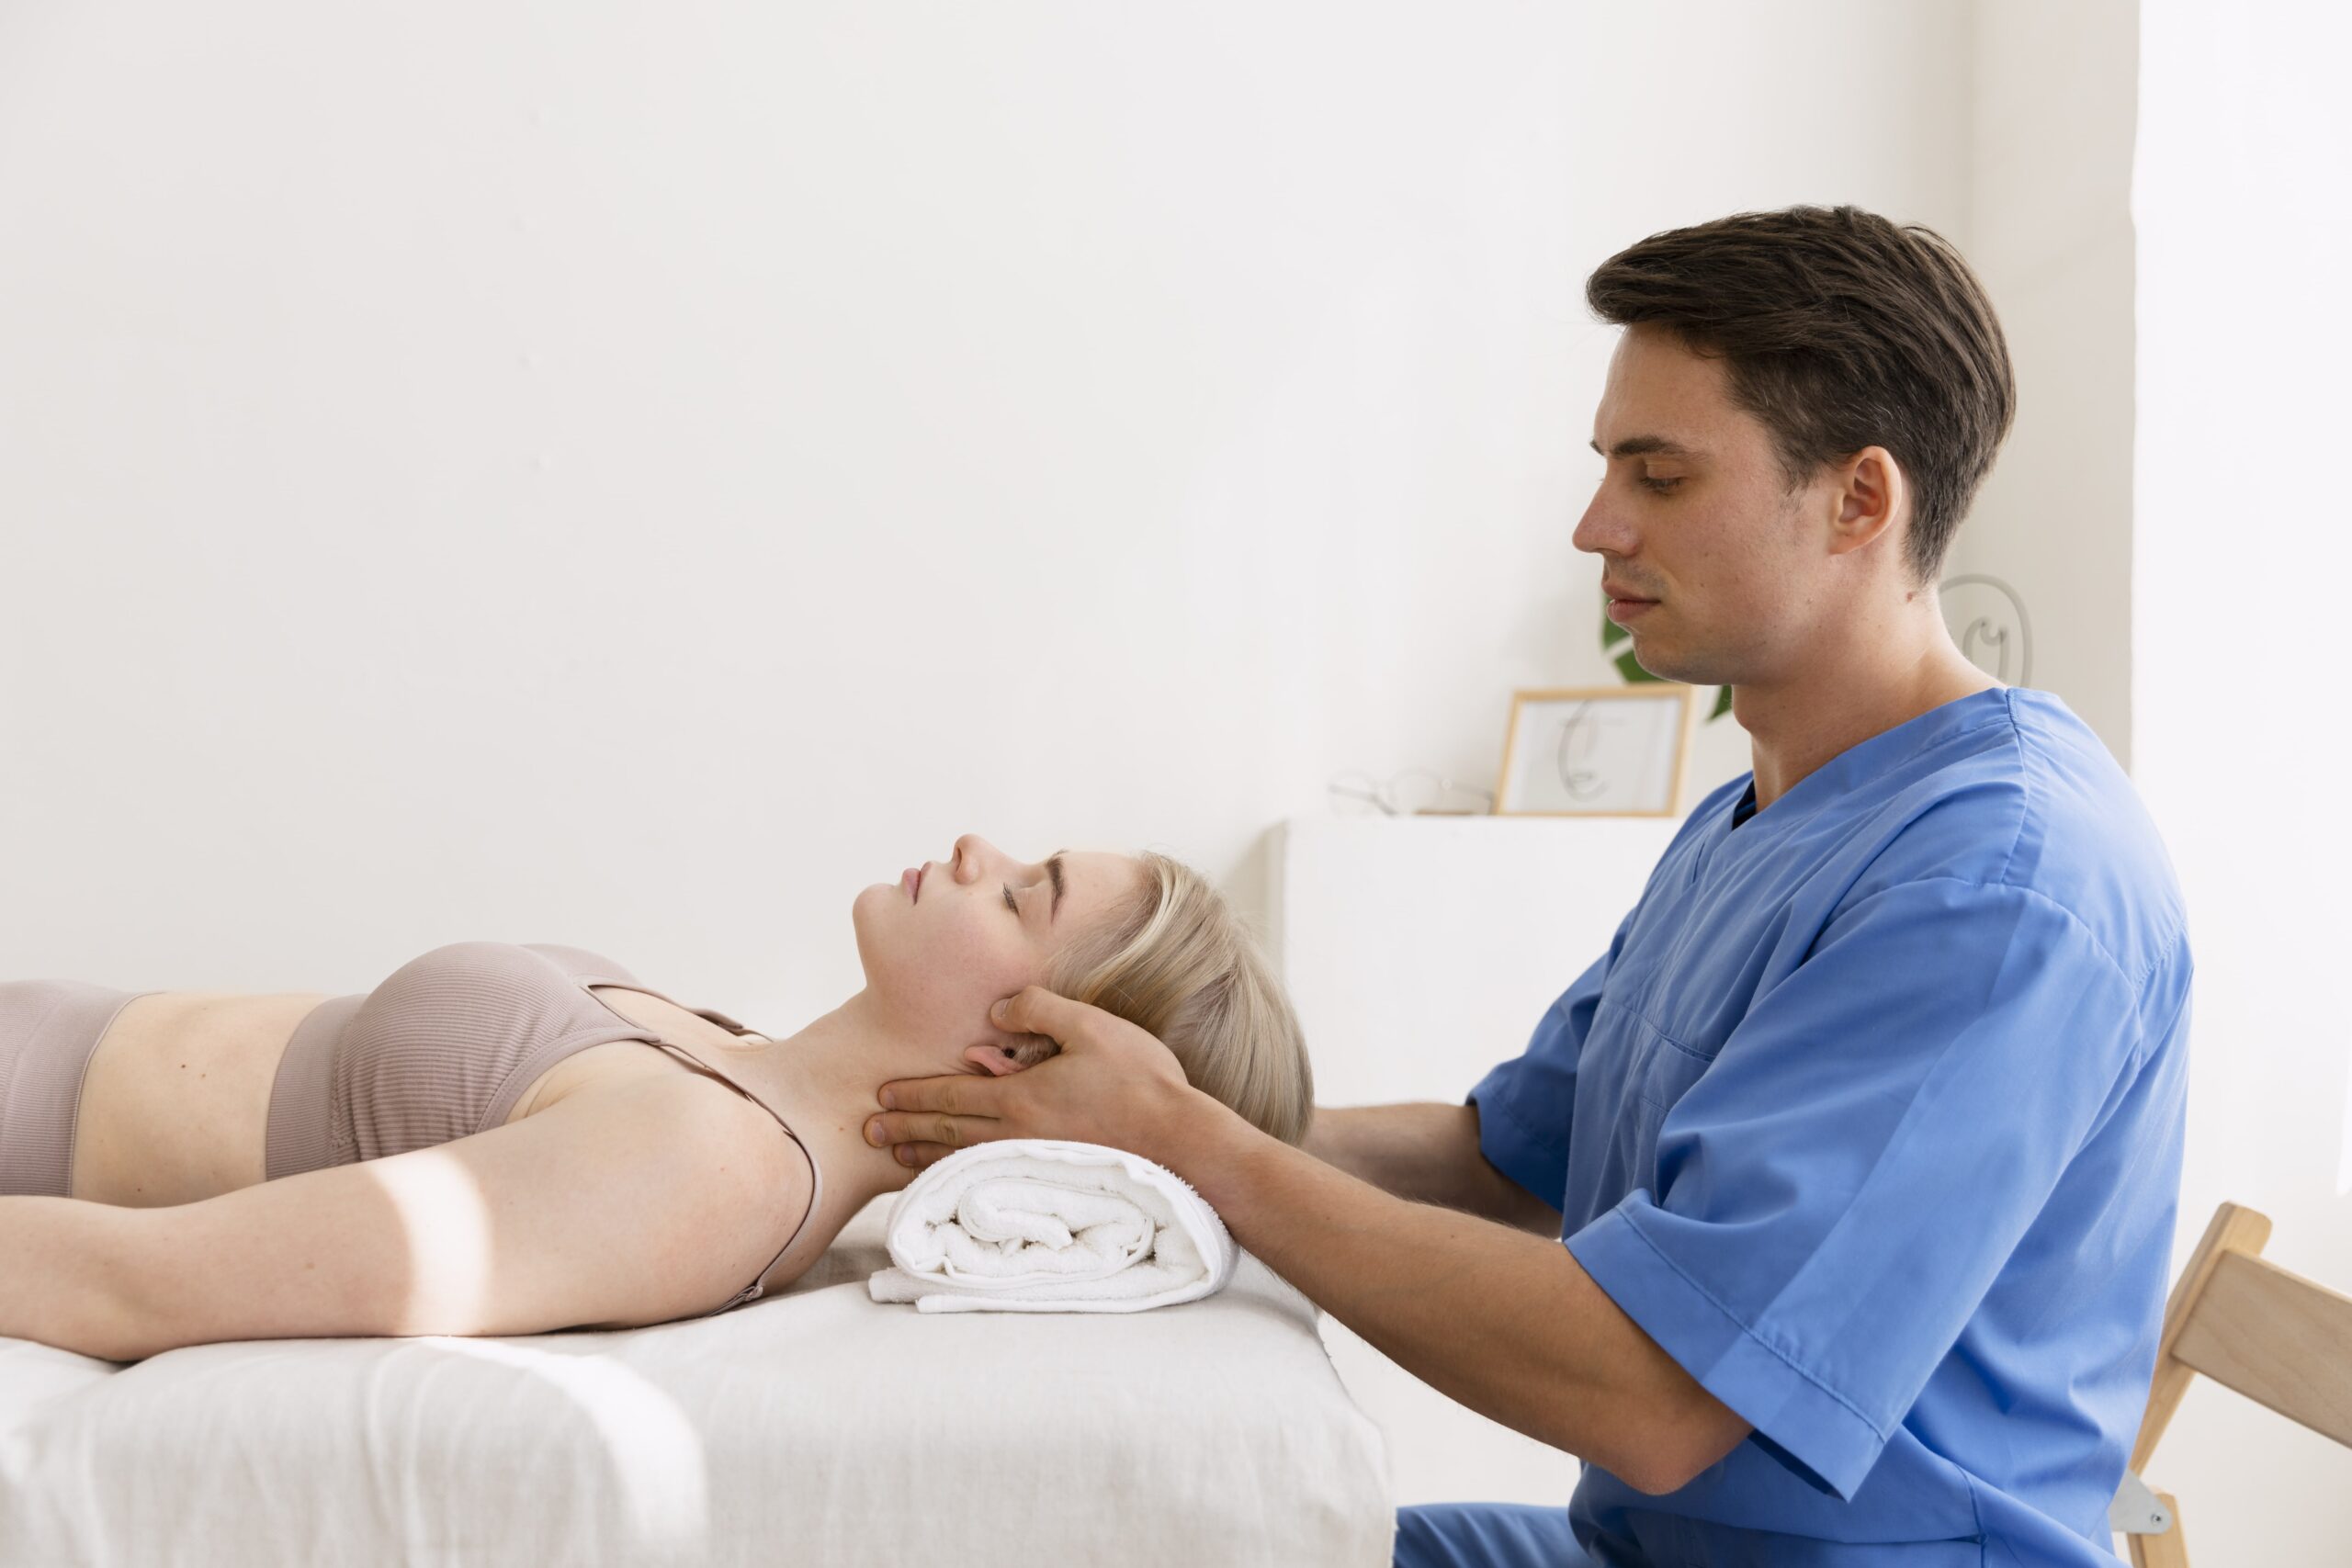 nurse-with-patient-osteopathy-session-min